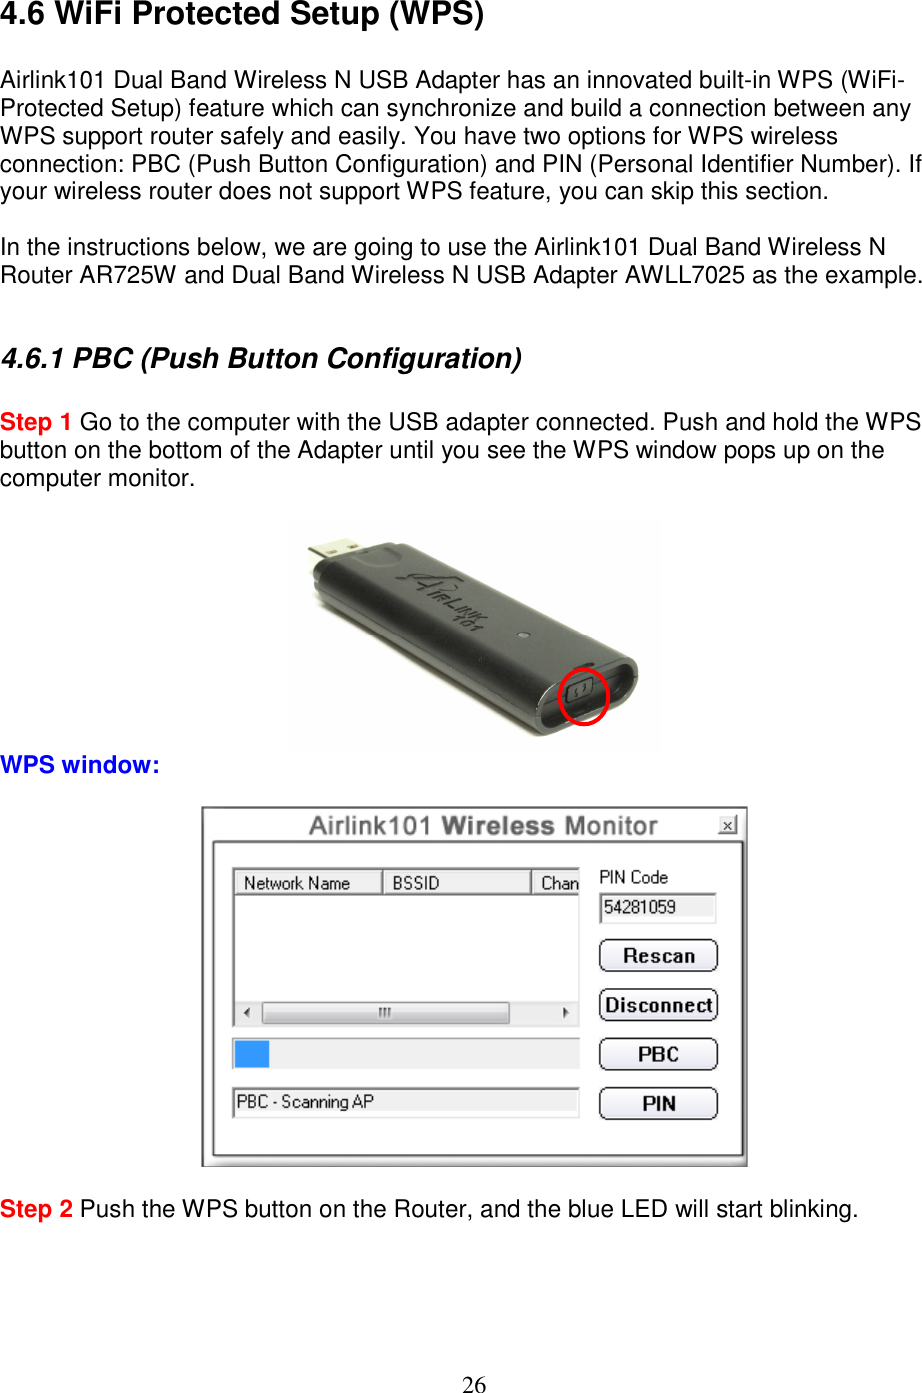 26 4.6 WiFi Protected Setup (WPS)  Airlink101 Dual Band Wireless N USB Adapter has an innovated built-in WPS (WiFi-Protected Setup) feature which can synchronize and build a connection between any WPS support router safely and easily. You have two options for WPS wireless connection: PBC (Push Button Configuration) and PIN (Personal Identifier Number). If your wireless router does not support WPS feature, you can skip this section.  In the instructions below, we are going to use the Airlink101 Dual Band Wireless N Router AR725W and Dual Band Wireless N USB Adapter AWLL7025 as the example.  4.6.1 PBC (Push Button Configuration)  Step 1 Go to the computer with the USB adapter connected. Push and hold the WPS button on the bottom of the Adapter until you see the WPS window pops up on the computer monitor.    WPS window:    Step 2 Push the WPS button on the Router, and the blue LED will start blinking.  